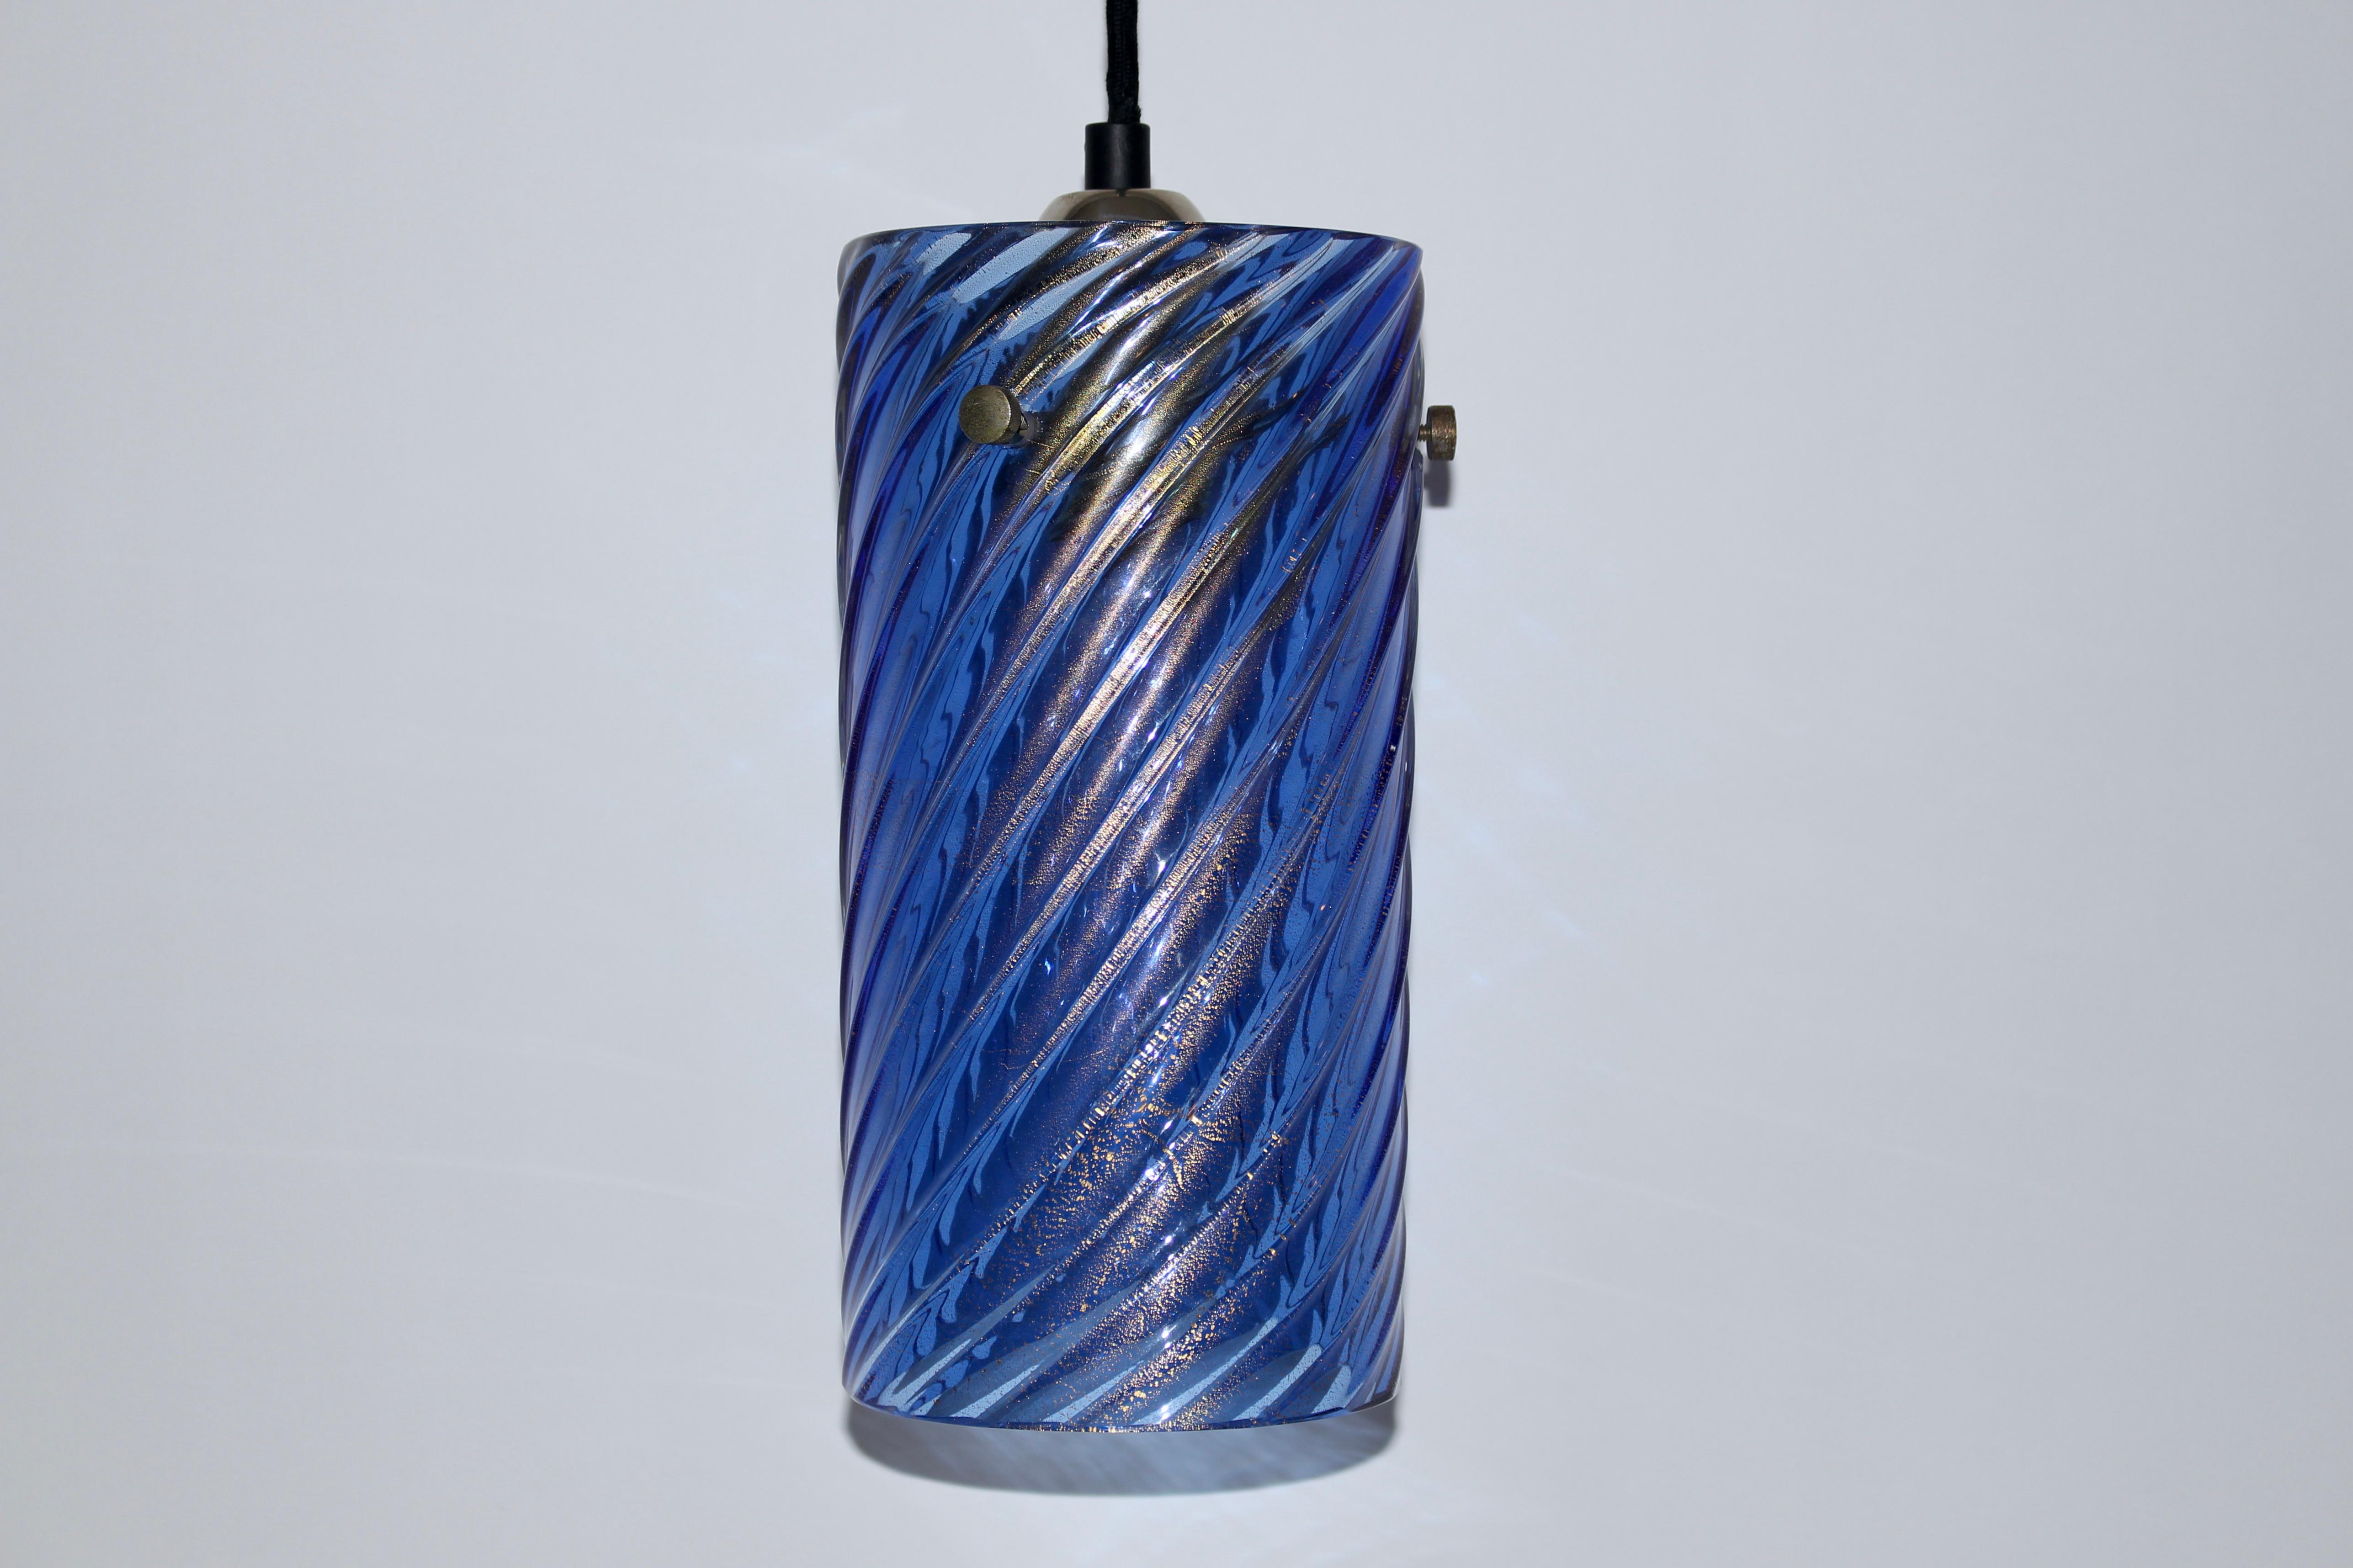 Barovier et Toso murano glass spiral blue, gold flecked hanging lamp, 1950's. Featuring a slim, ribbed (5D) cylinder in translucent Deep Cobalt Blue Murano glass with Gold inclusions. Small footprint. With five foot Black cord, nickel-plated 3.5D